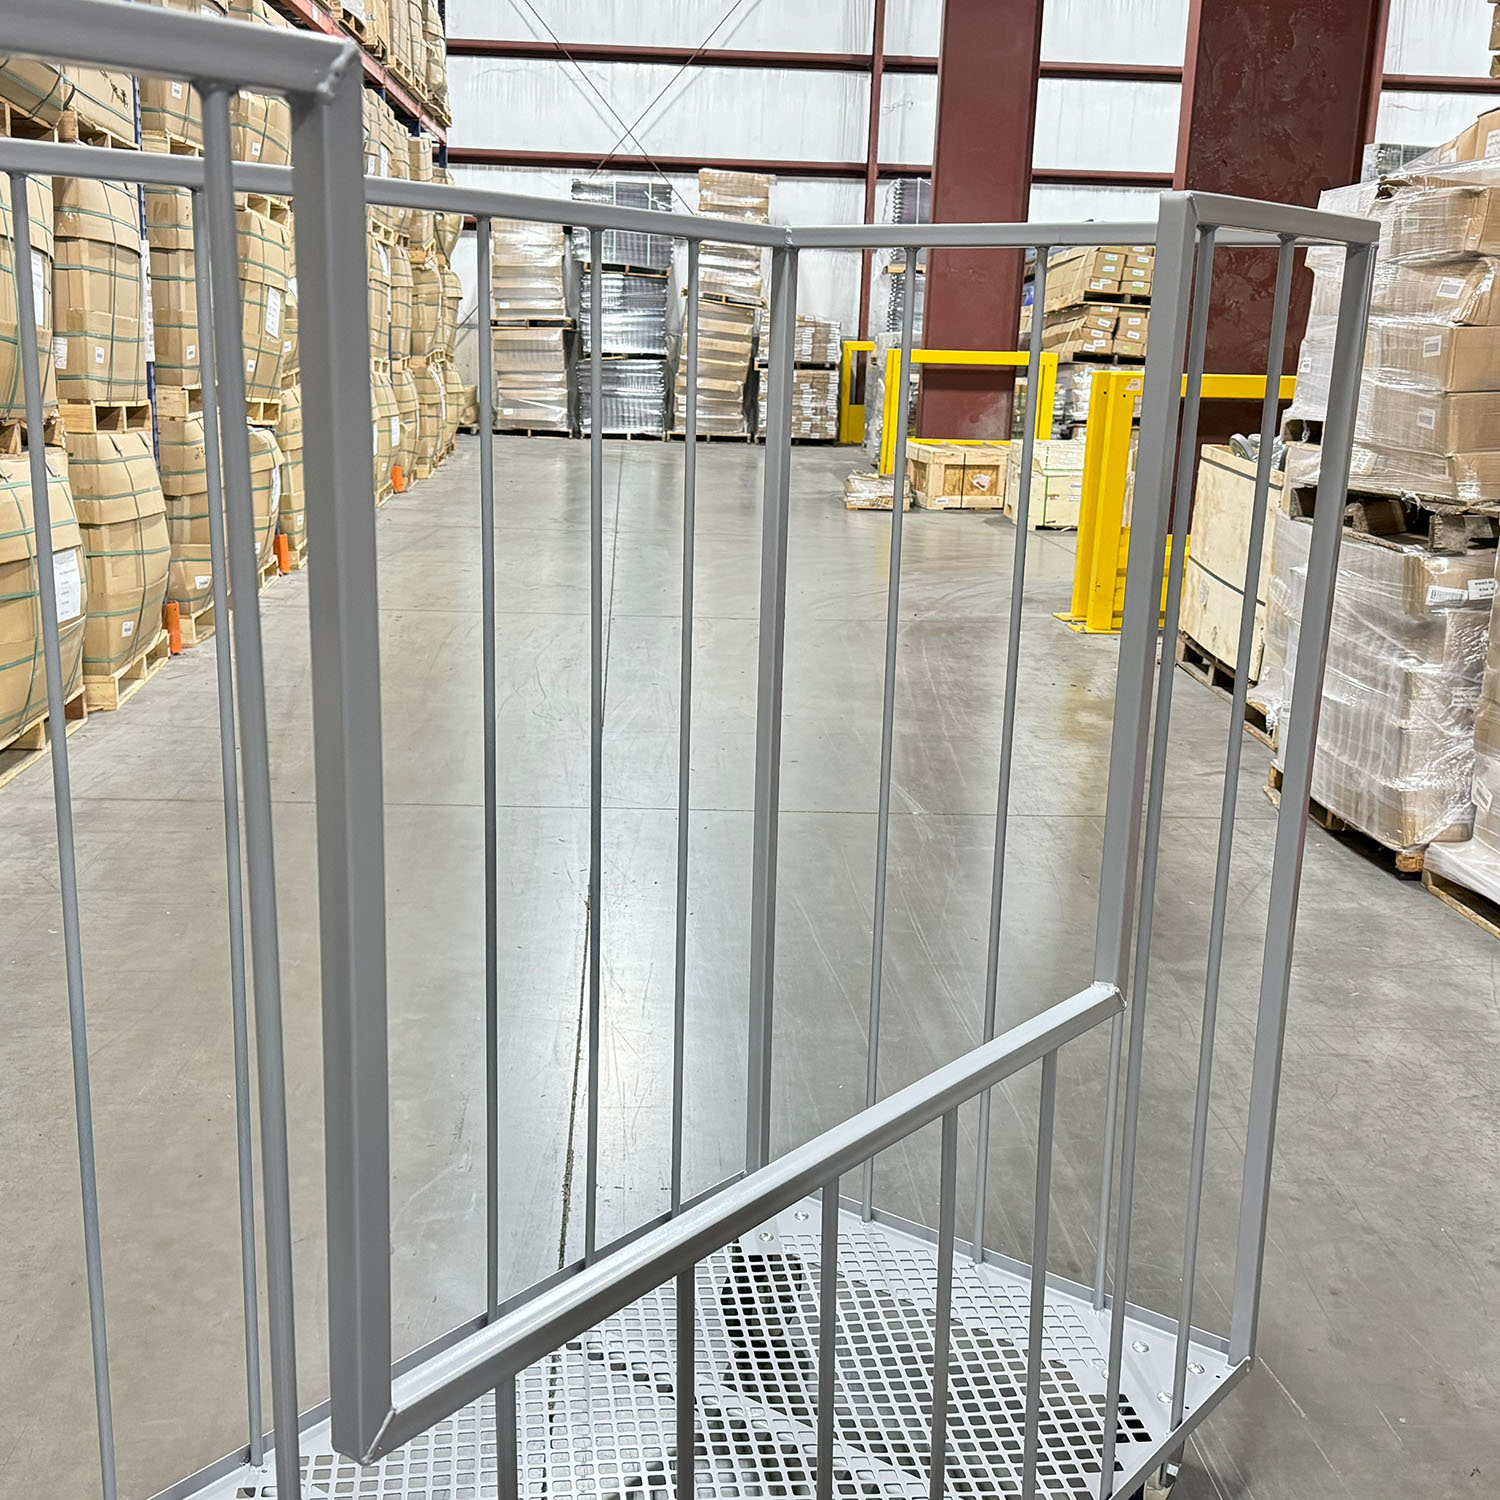 Secure. Three sides of this rolltainer keeps items inside cart. Material handling INDUSTRIAL CARTS, picking cart, forklift compatible cart Forklift Cart picking cart | National Cart picking Utility Cart, Distribution Cart, picking cart, ecom cart, ecommerce cart, ecommerce picking cart, picking cart, grocery cart, grocery picking cart, department store cart, beverage cart BACK STOCK CARTS Picking Cart Rolltainer, order picker cart, order picking cart